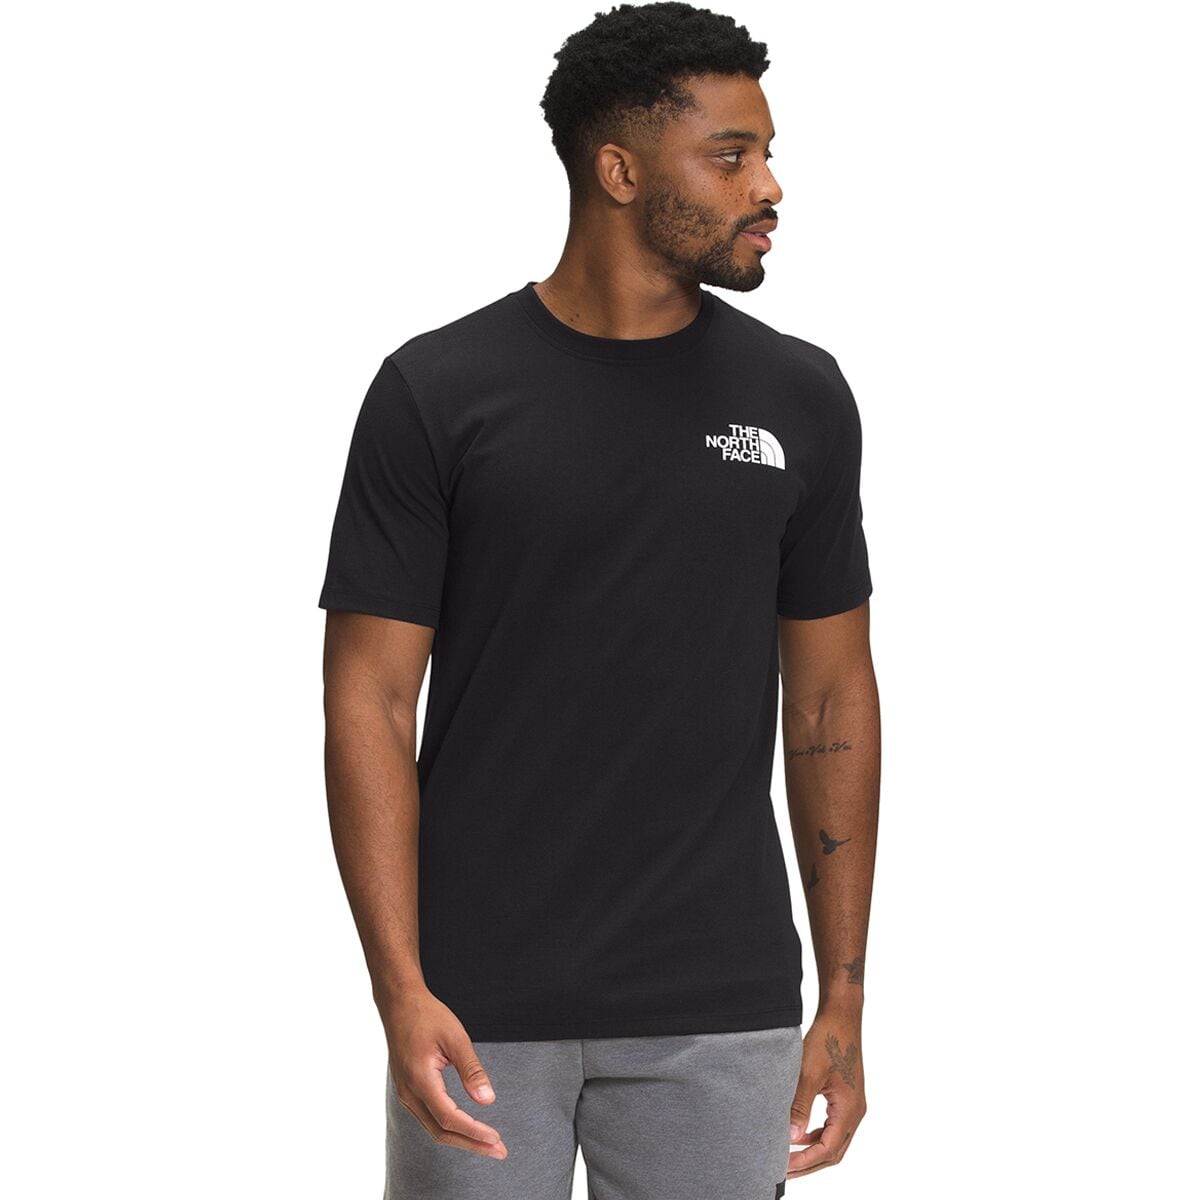 The North Face Earth Day Short-Sleeve T-Shirt - Men's